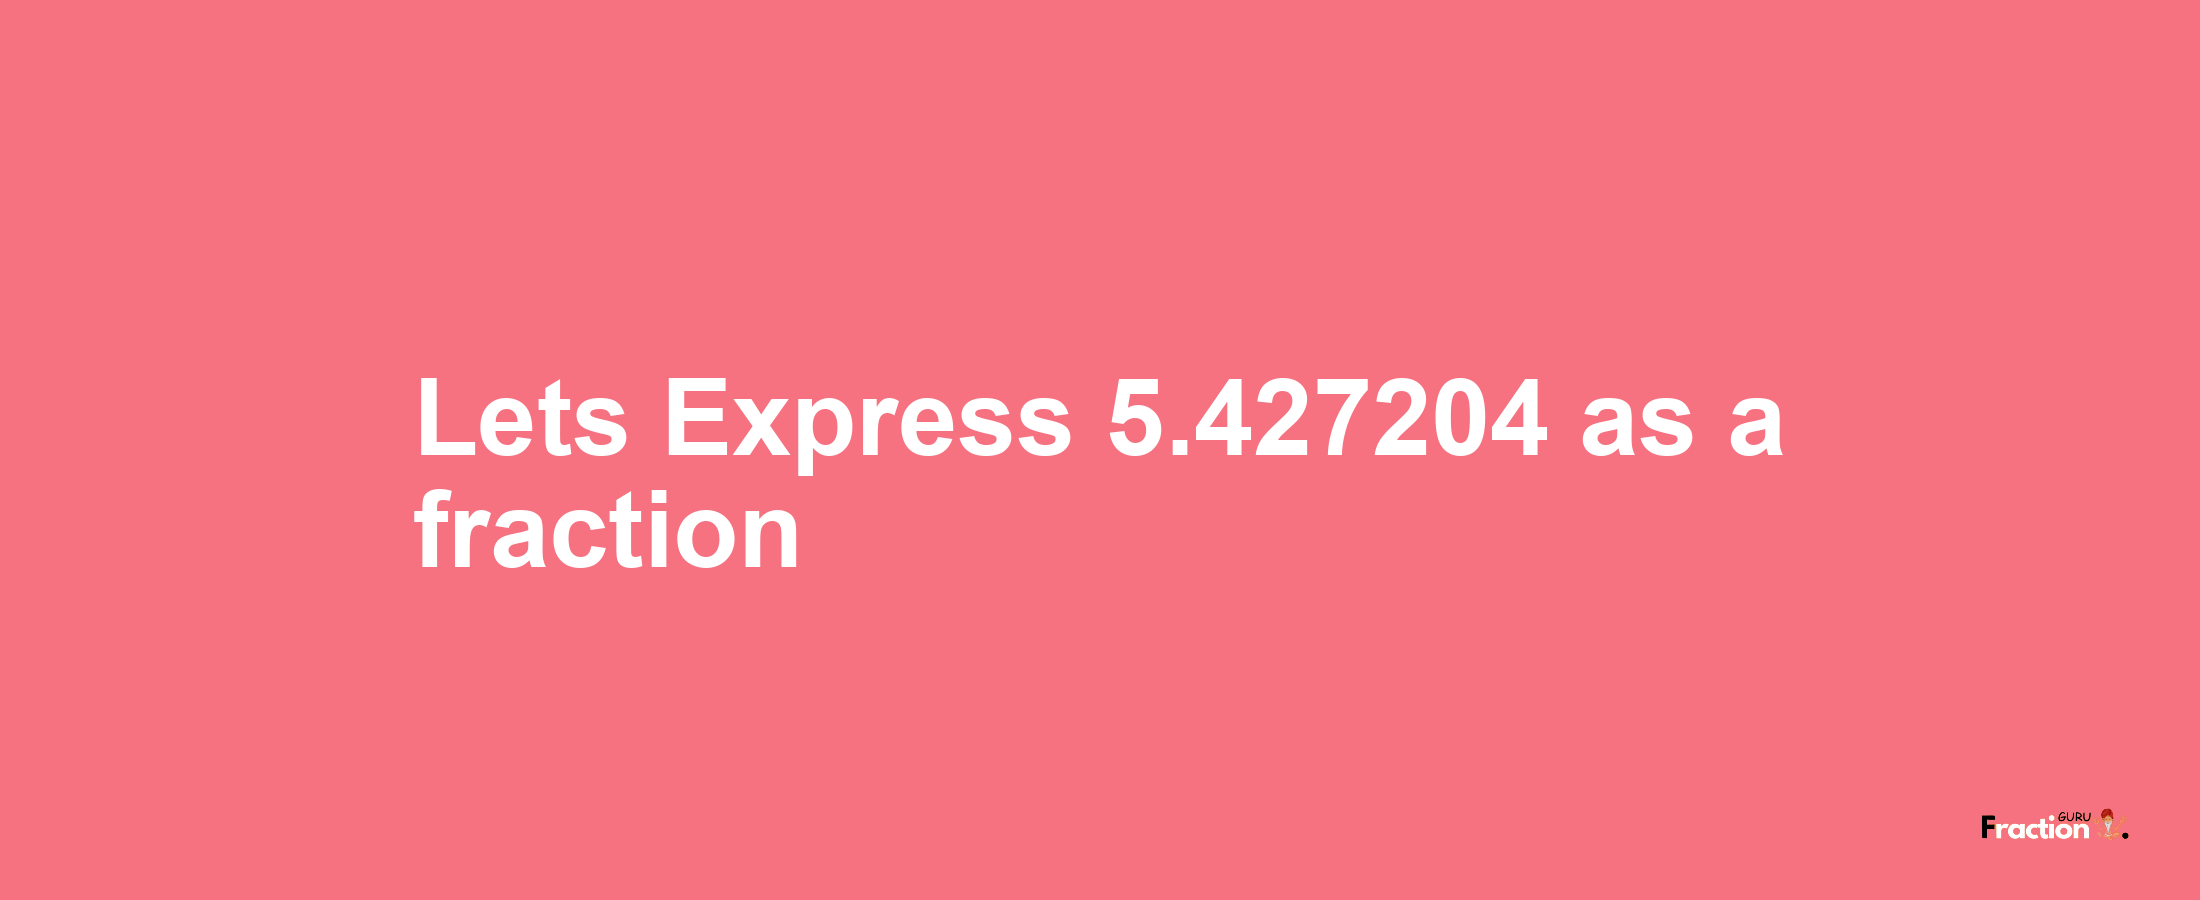 Lets Express 5.427204 as afraction